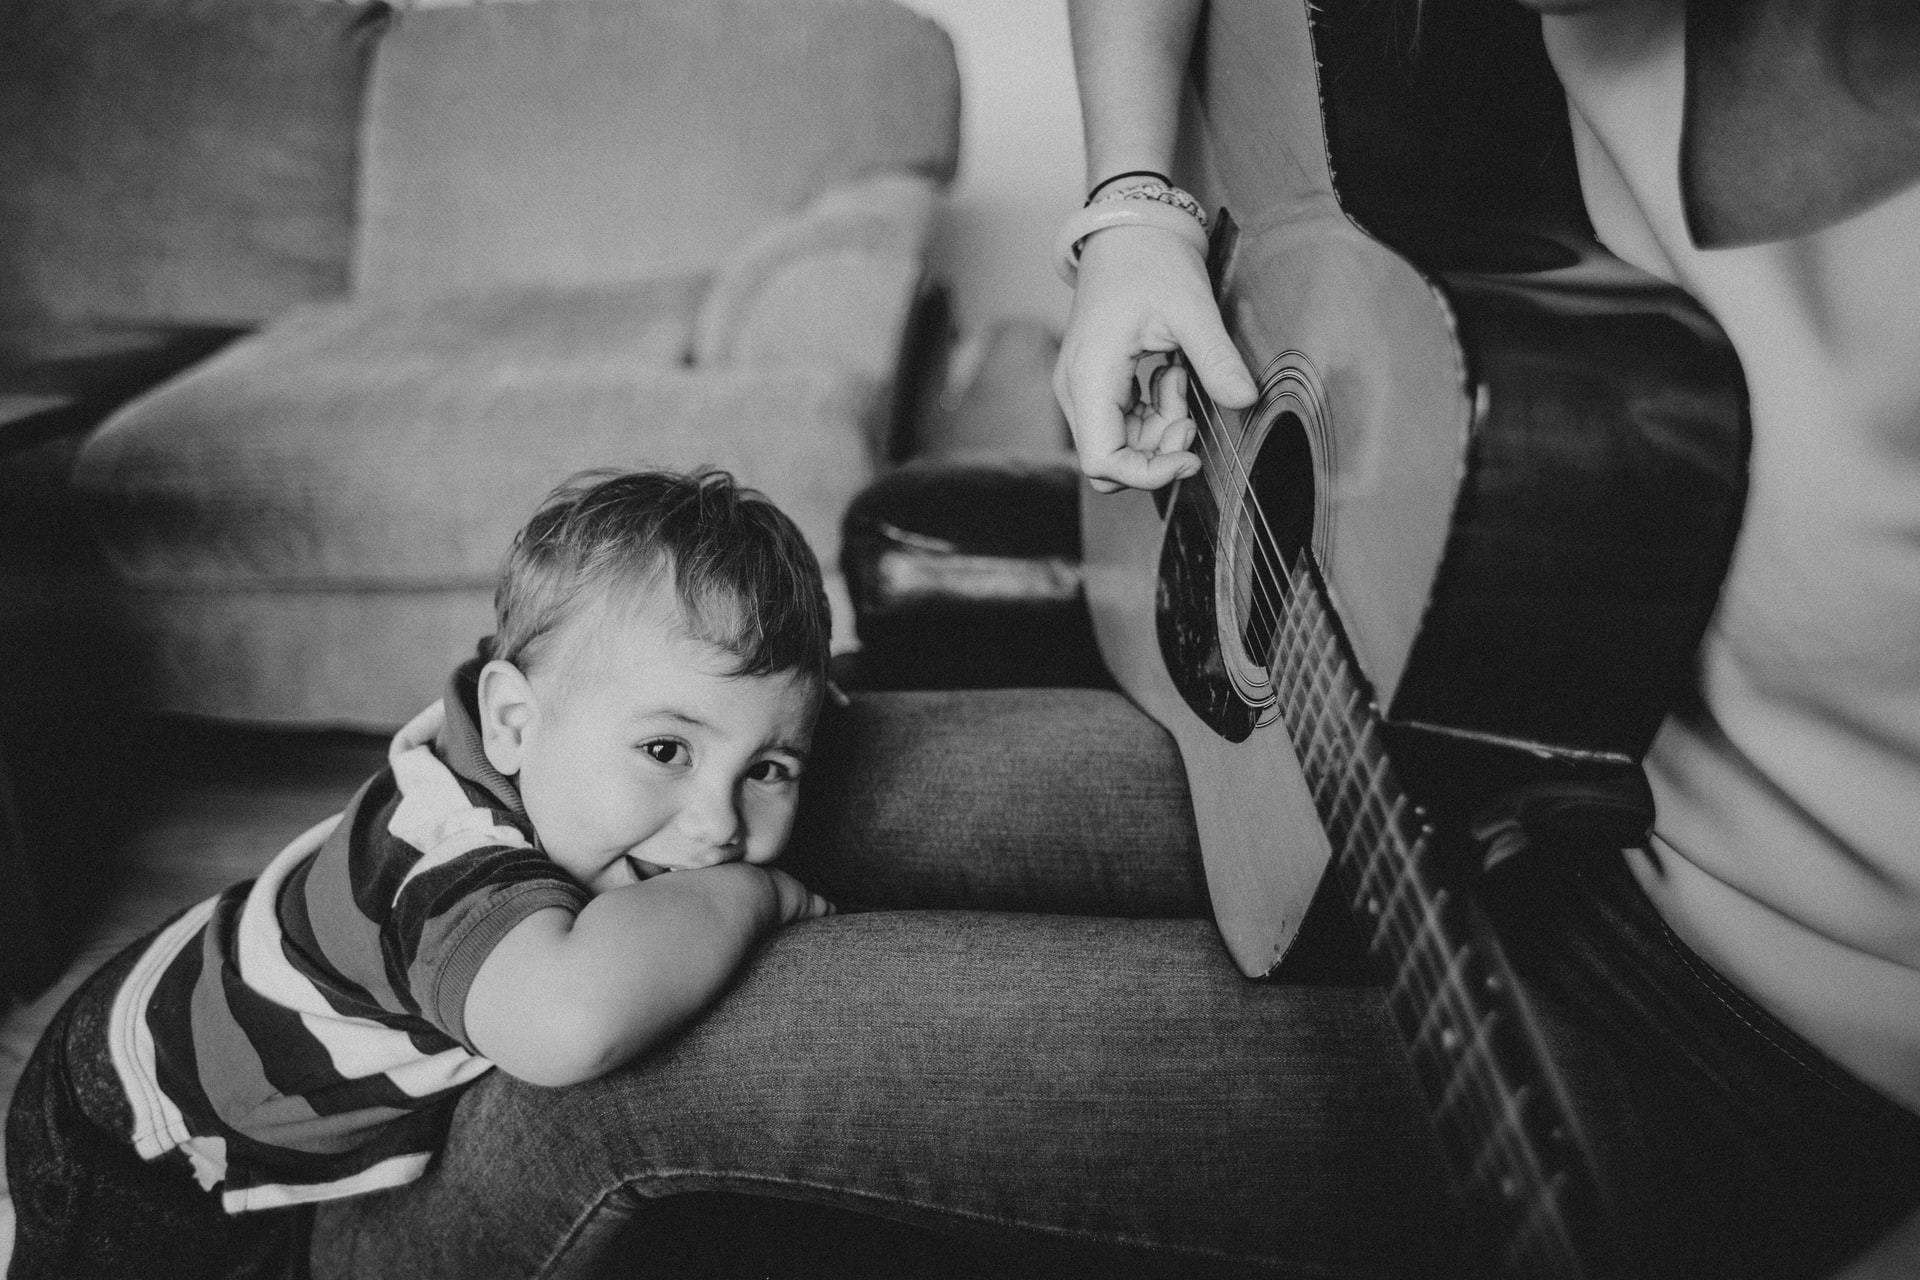 Baby looking at camera while person plays guitar.